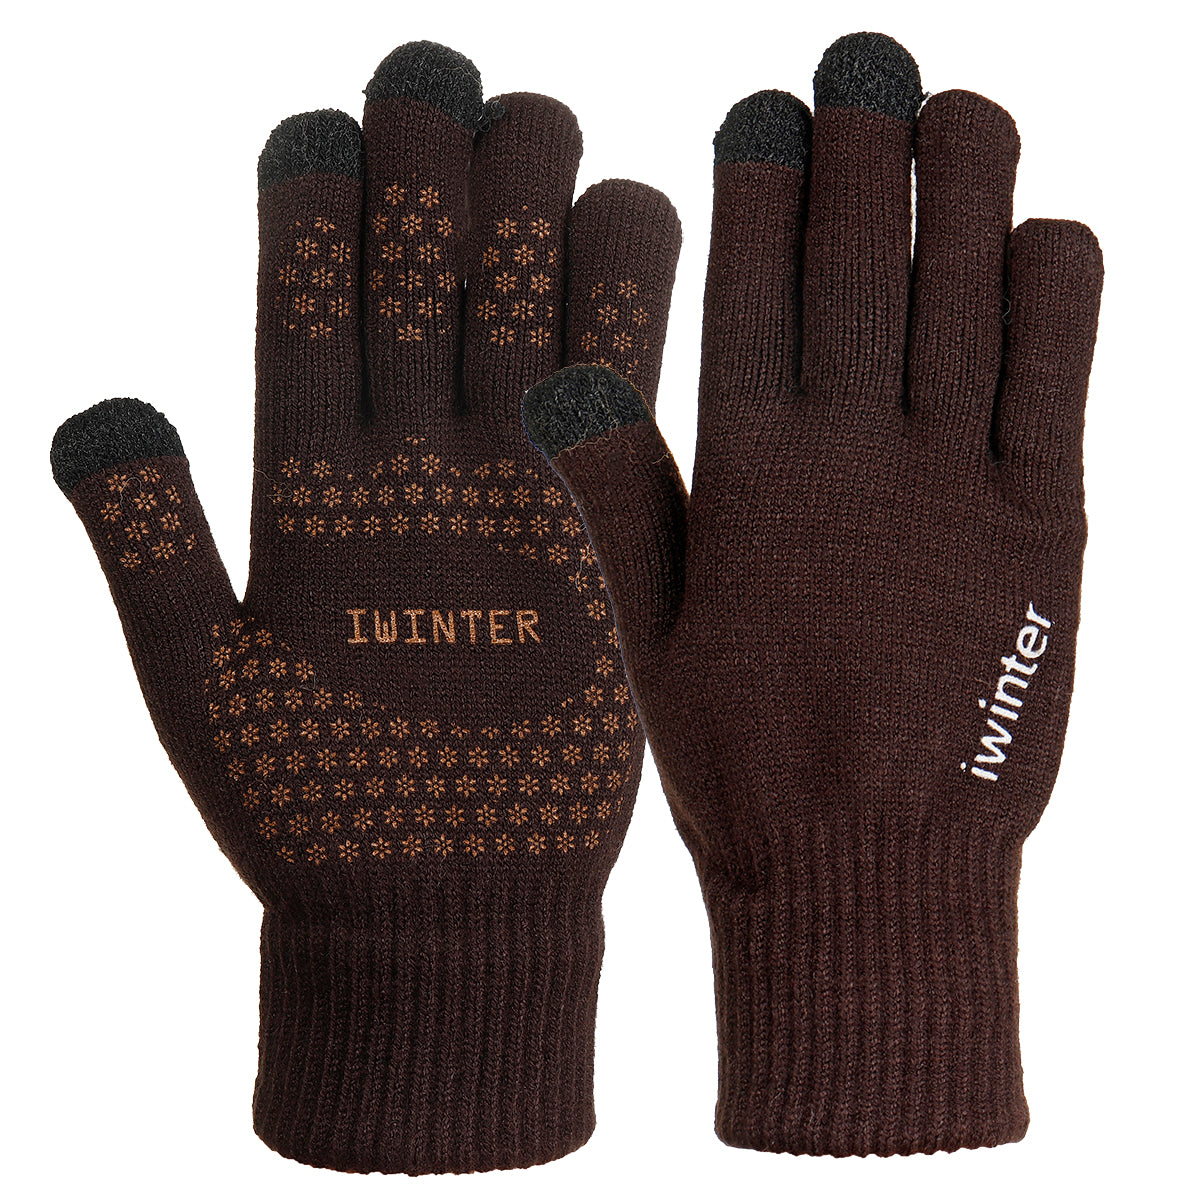 Dark Slate Gray Knitted Touch Screen Outdoor Gloves Motorcycle Winter Warm Windproof Fleece Lined Thermal Non-slip